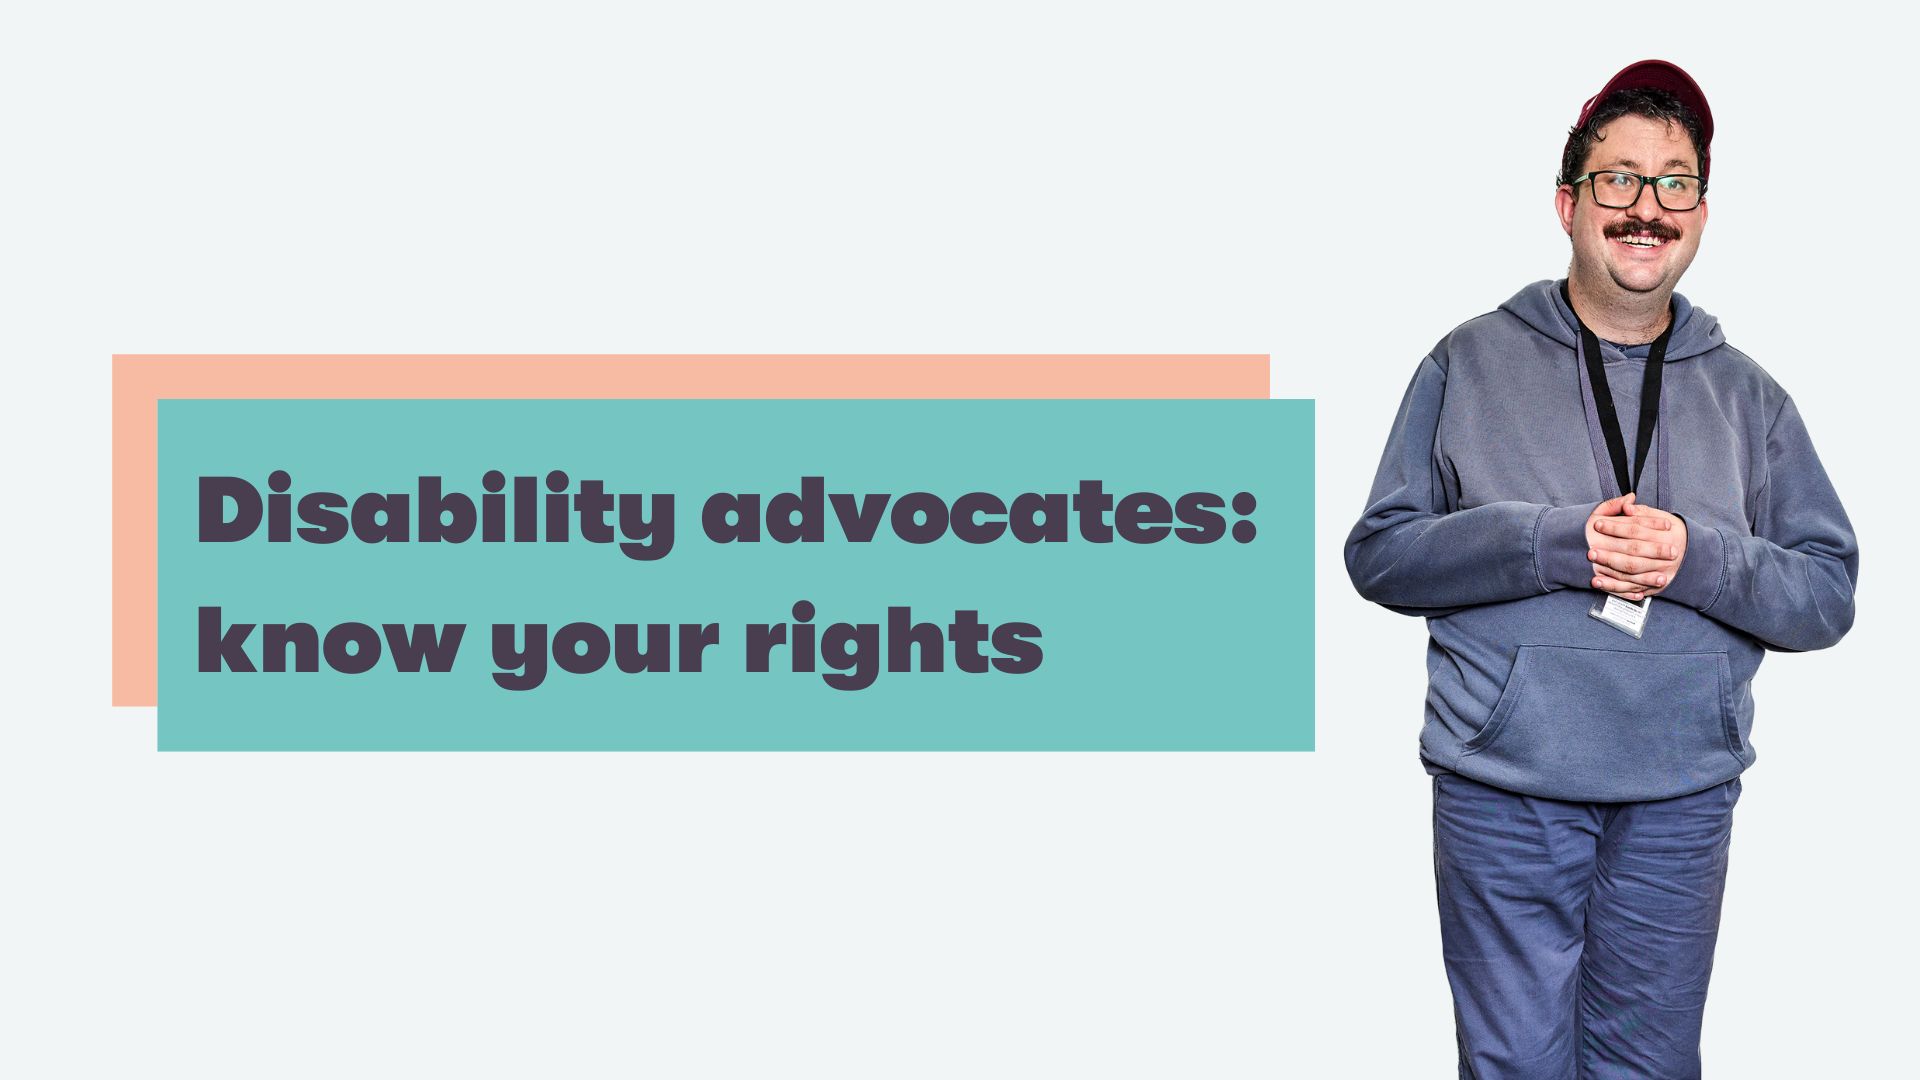 Disability advocates: know your rights